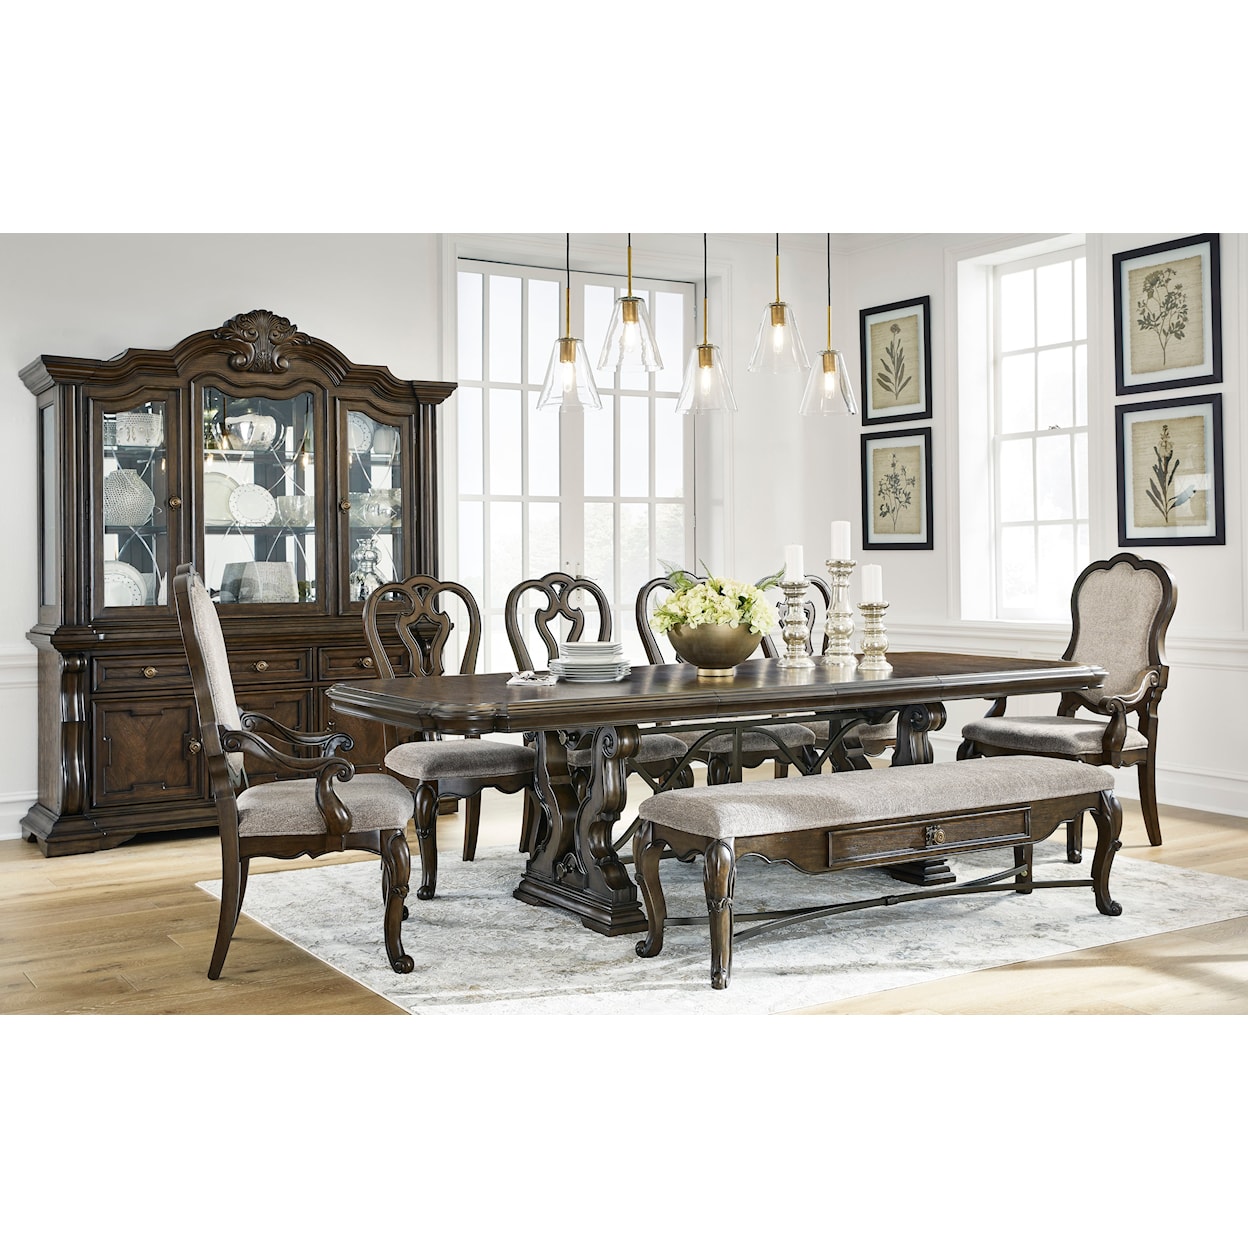 Ashley Furniture Signature Design Maylee 8-Piece Dining Set with Bench